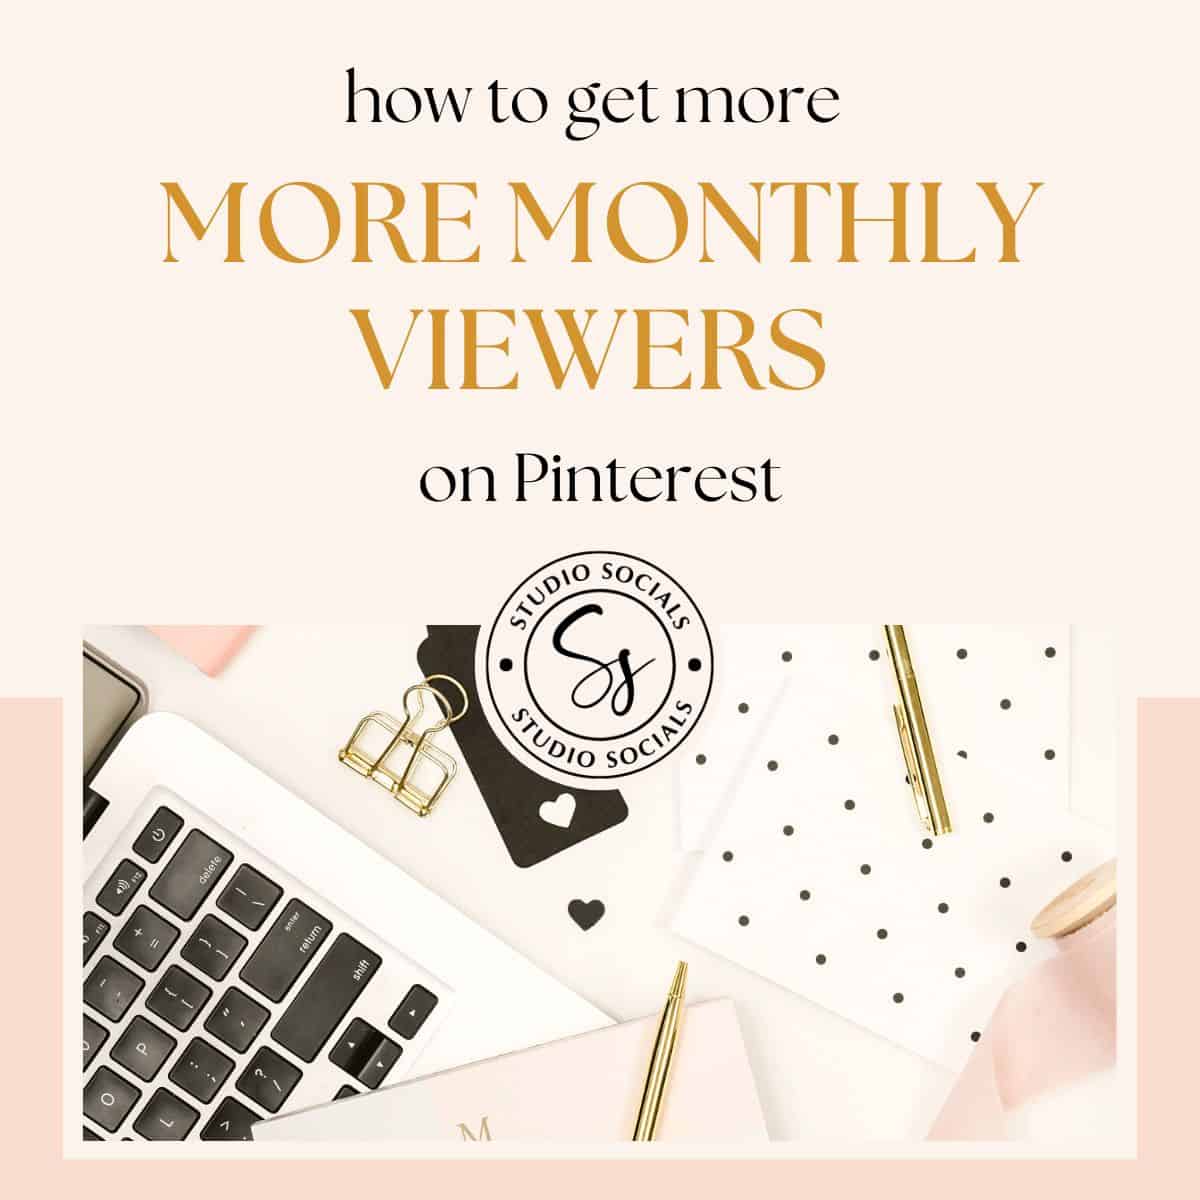 how to get more monthly viewers on Pinterest